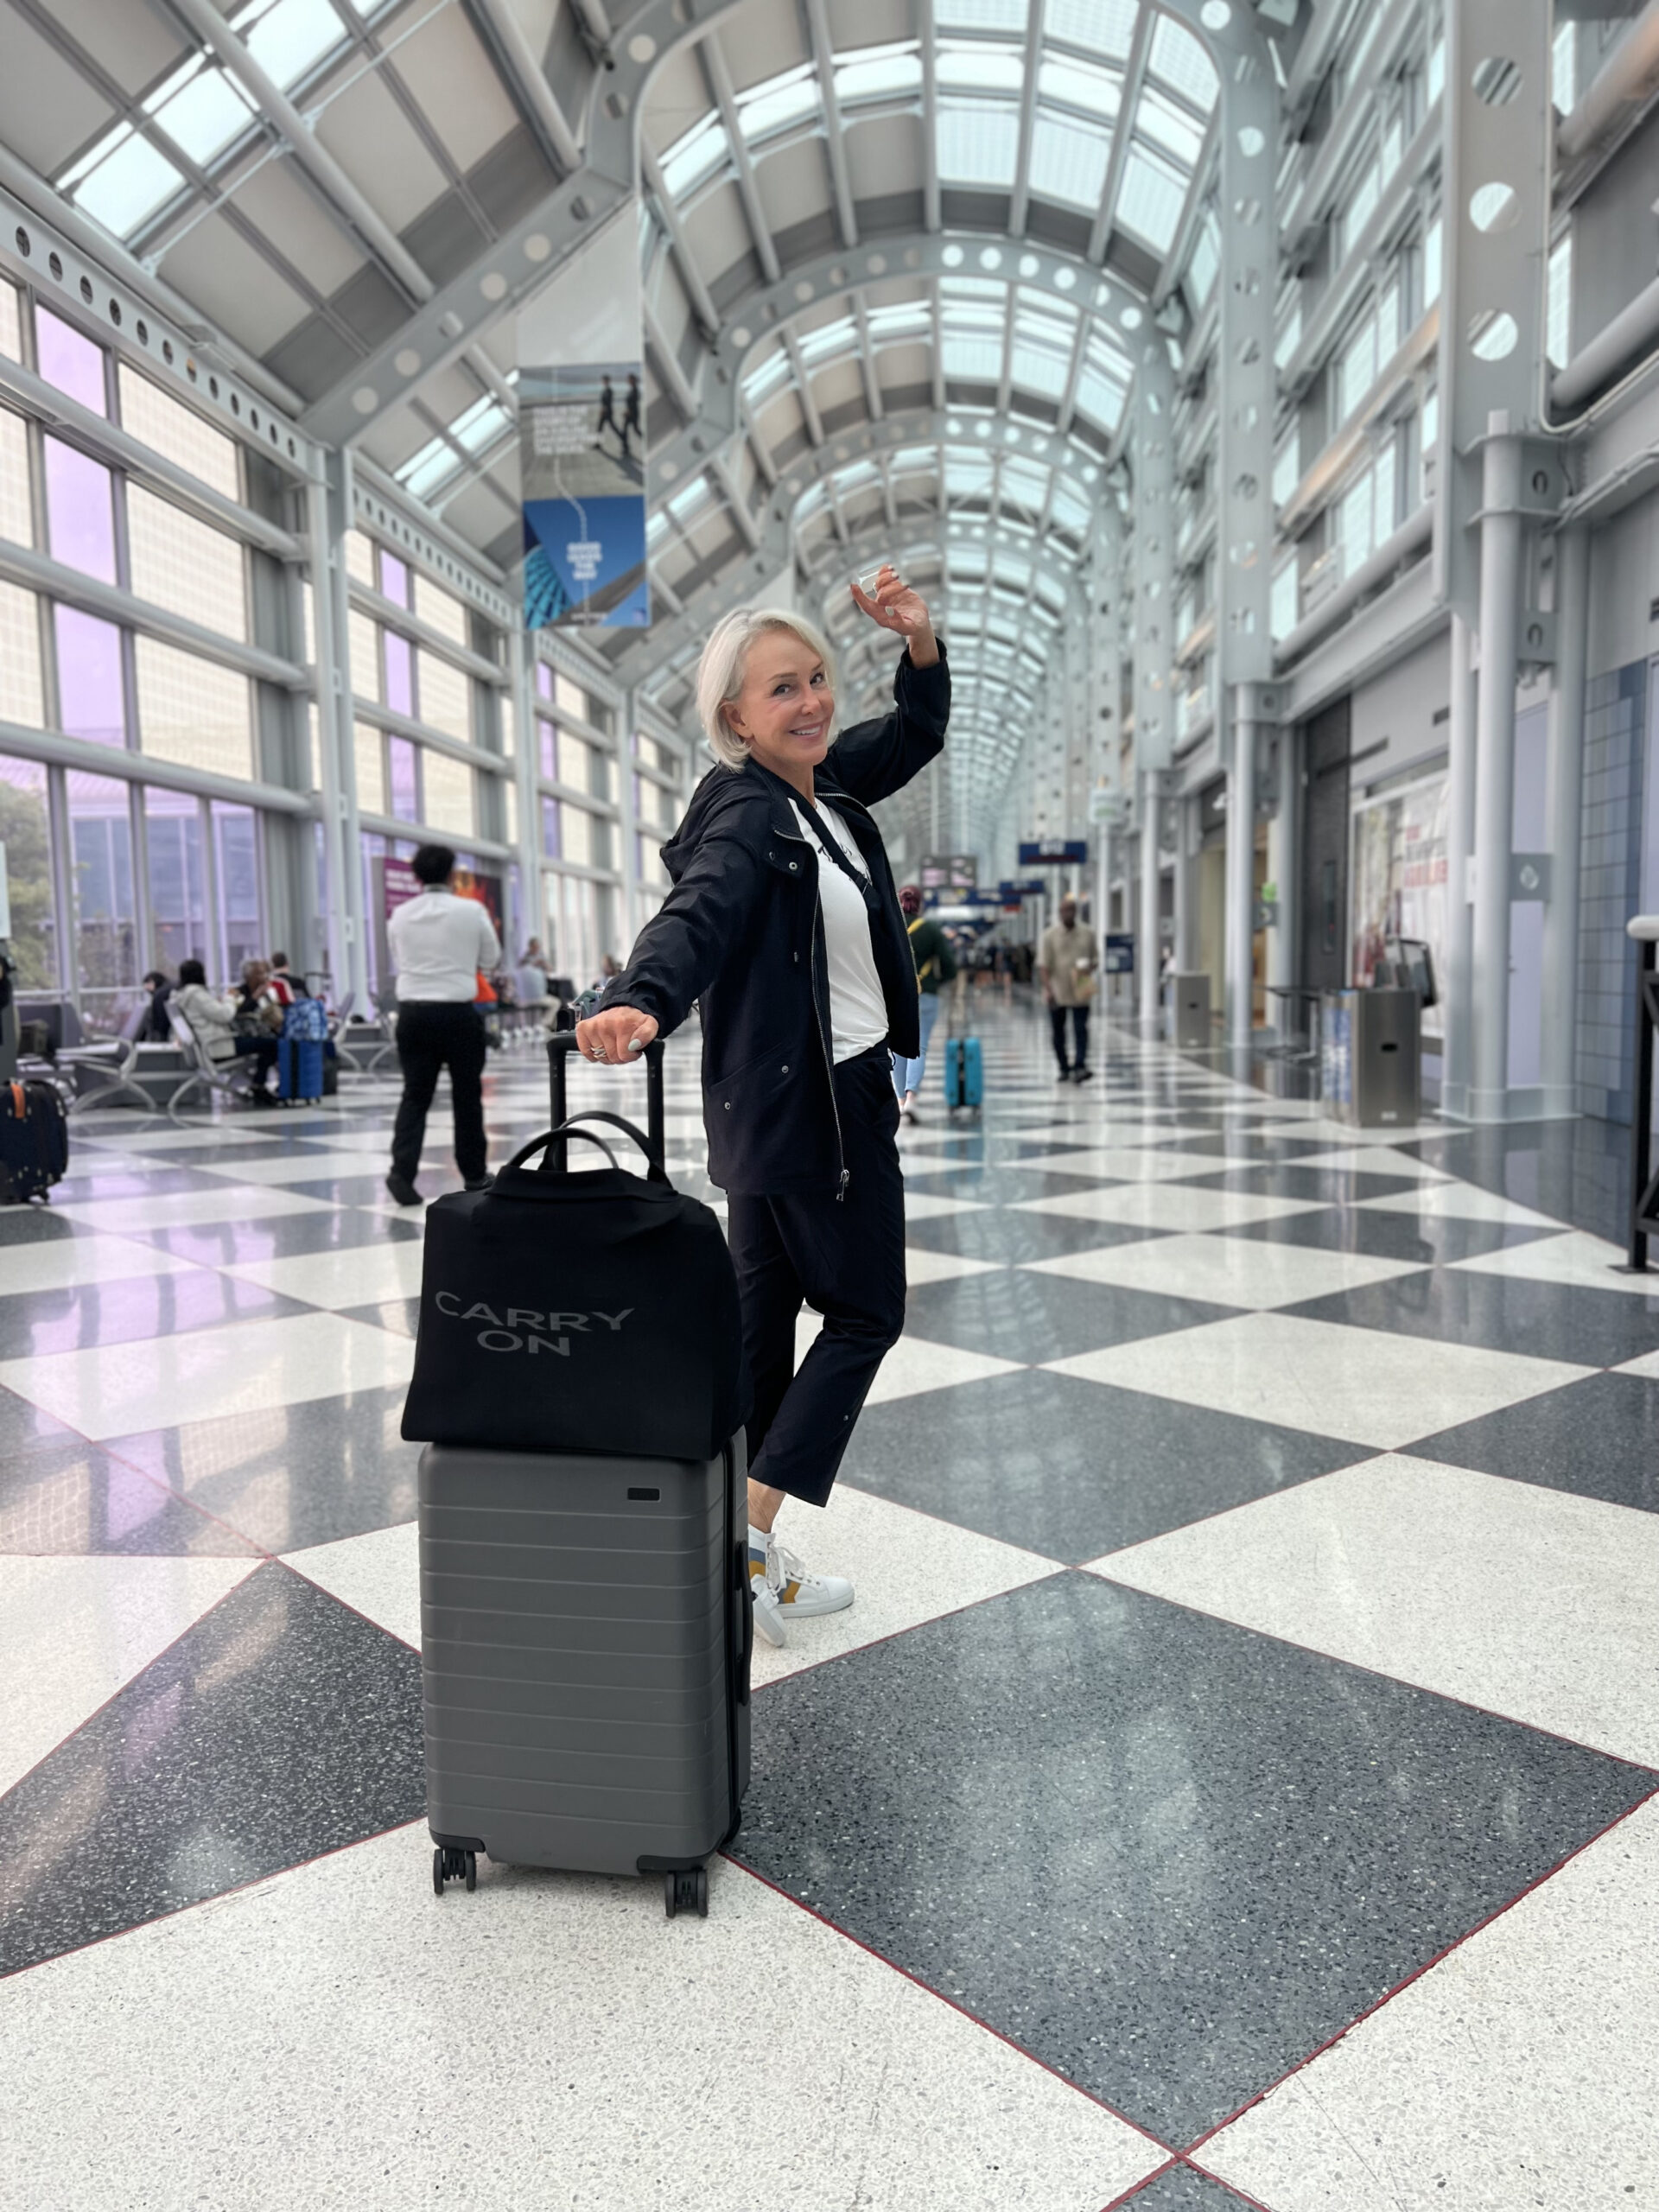 Luxury Luggage for Every Budget  Suitcases + Carry-Ons + More